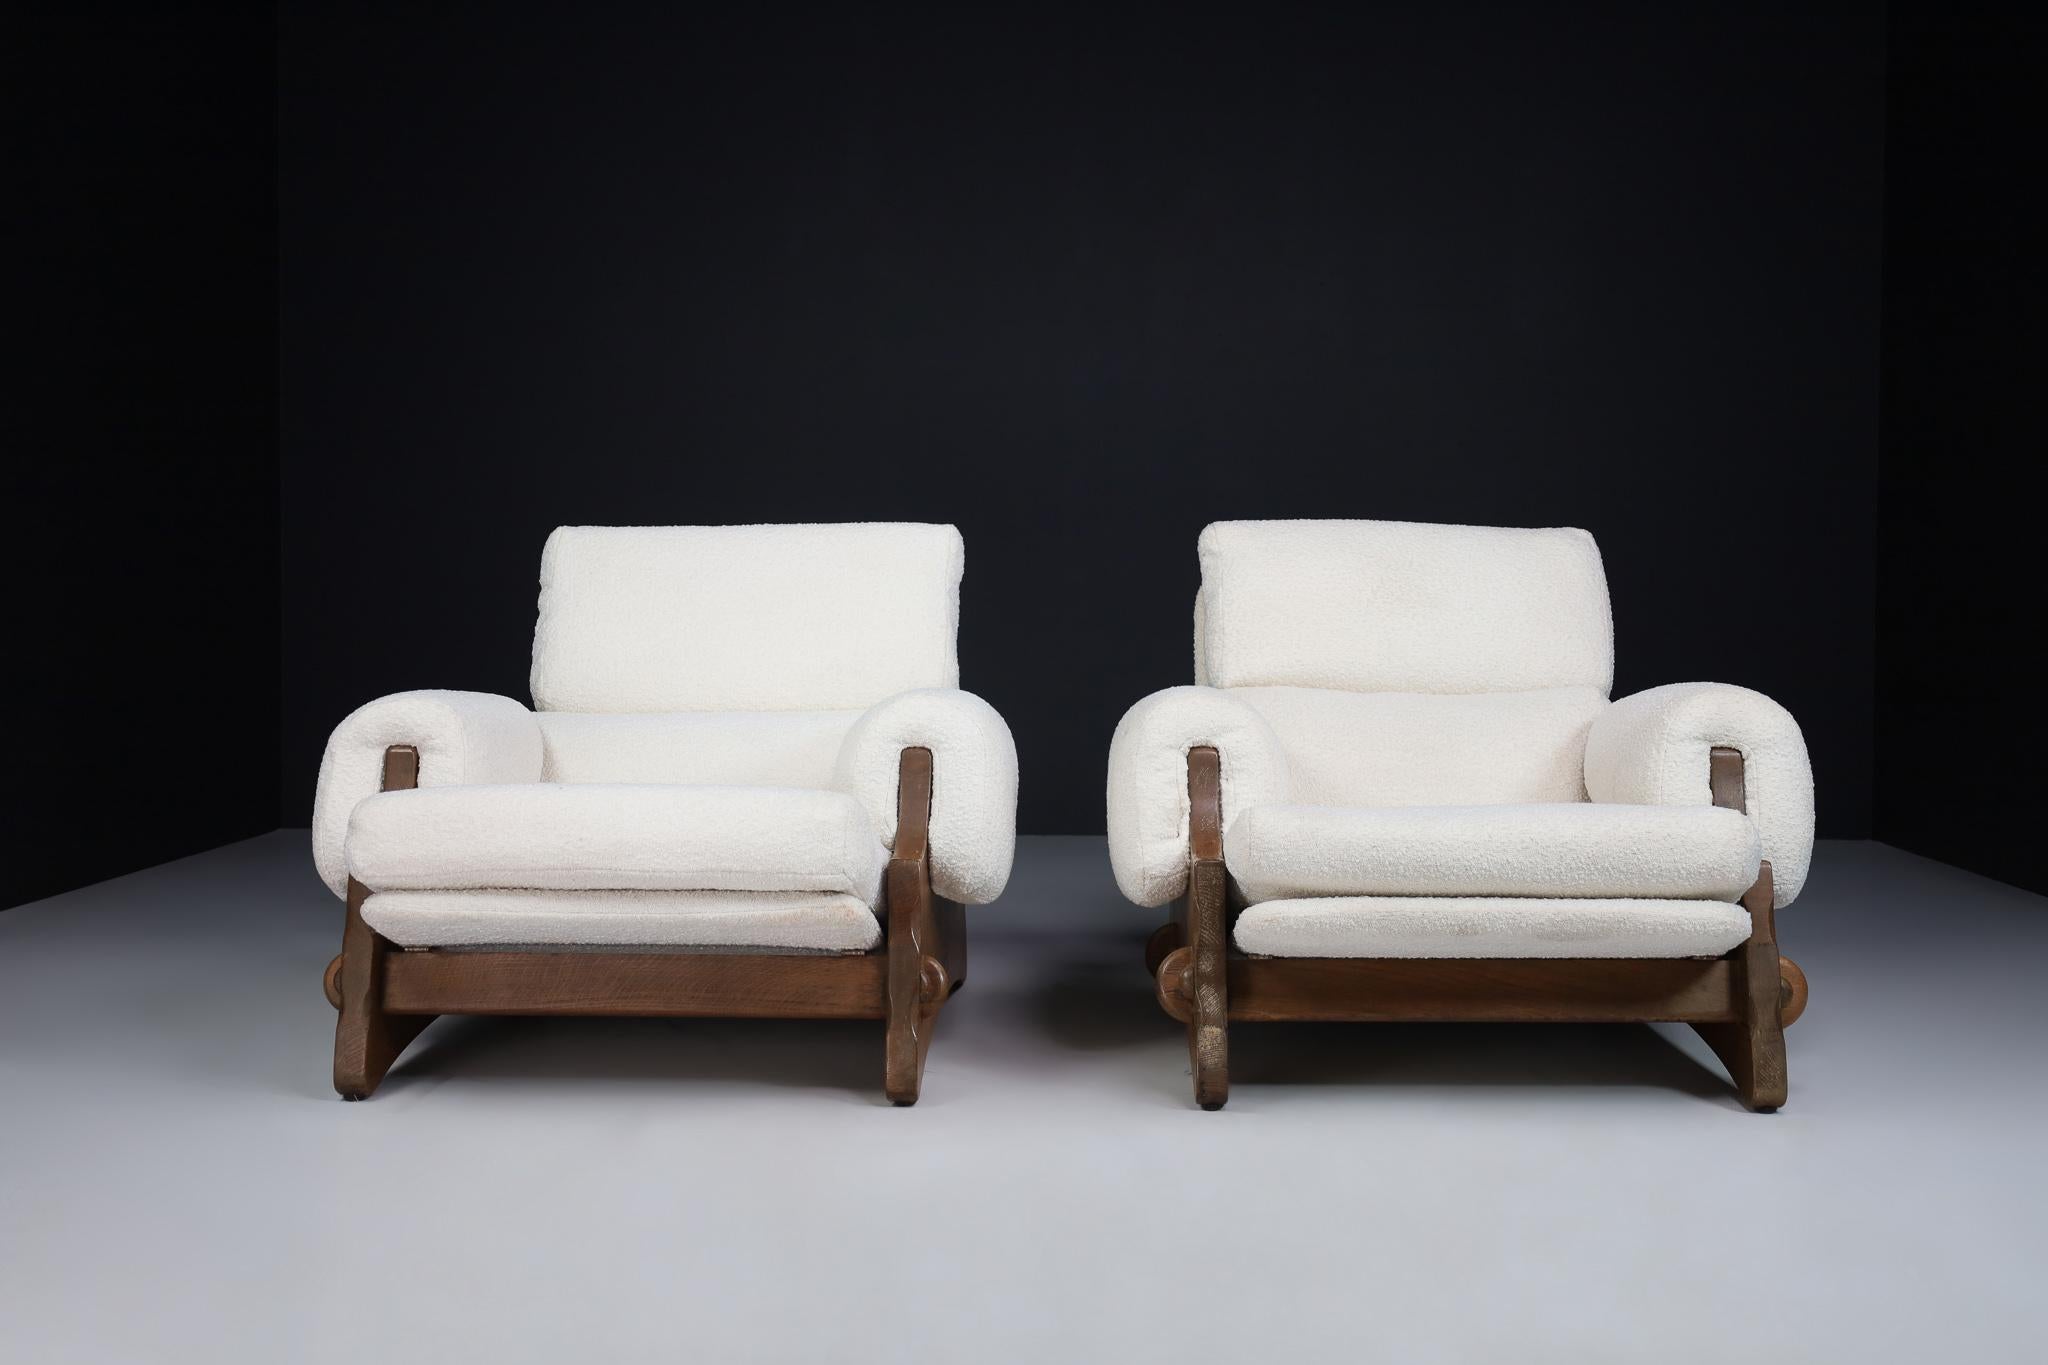 Spanish Mid-Century Modern XL Brutalist Lounge Chairs in Oak and Bouclé, Spain 1960s For Sale